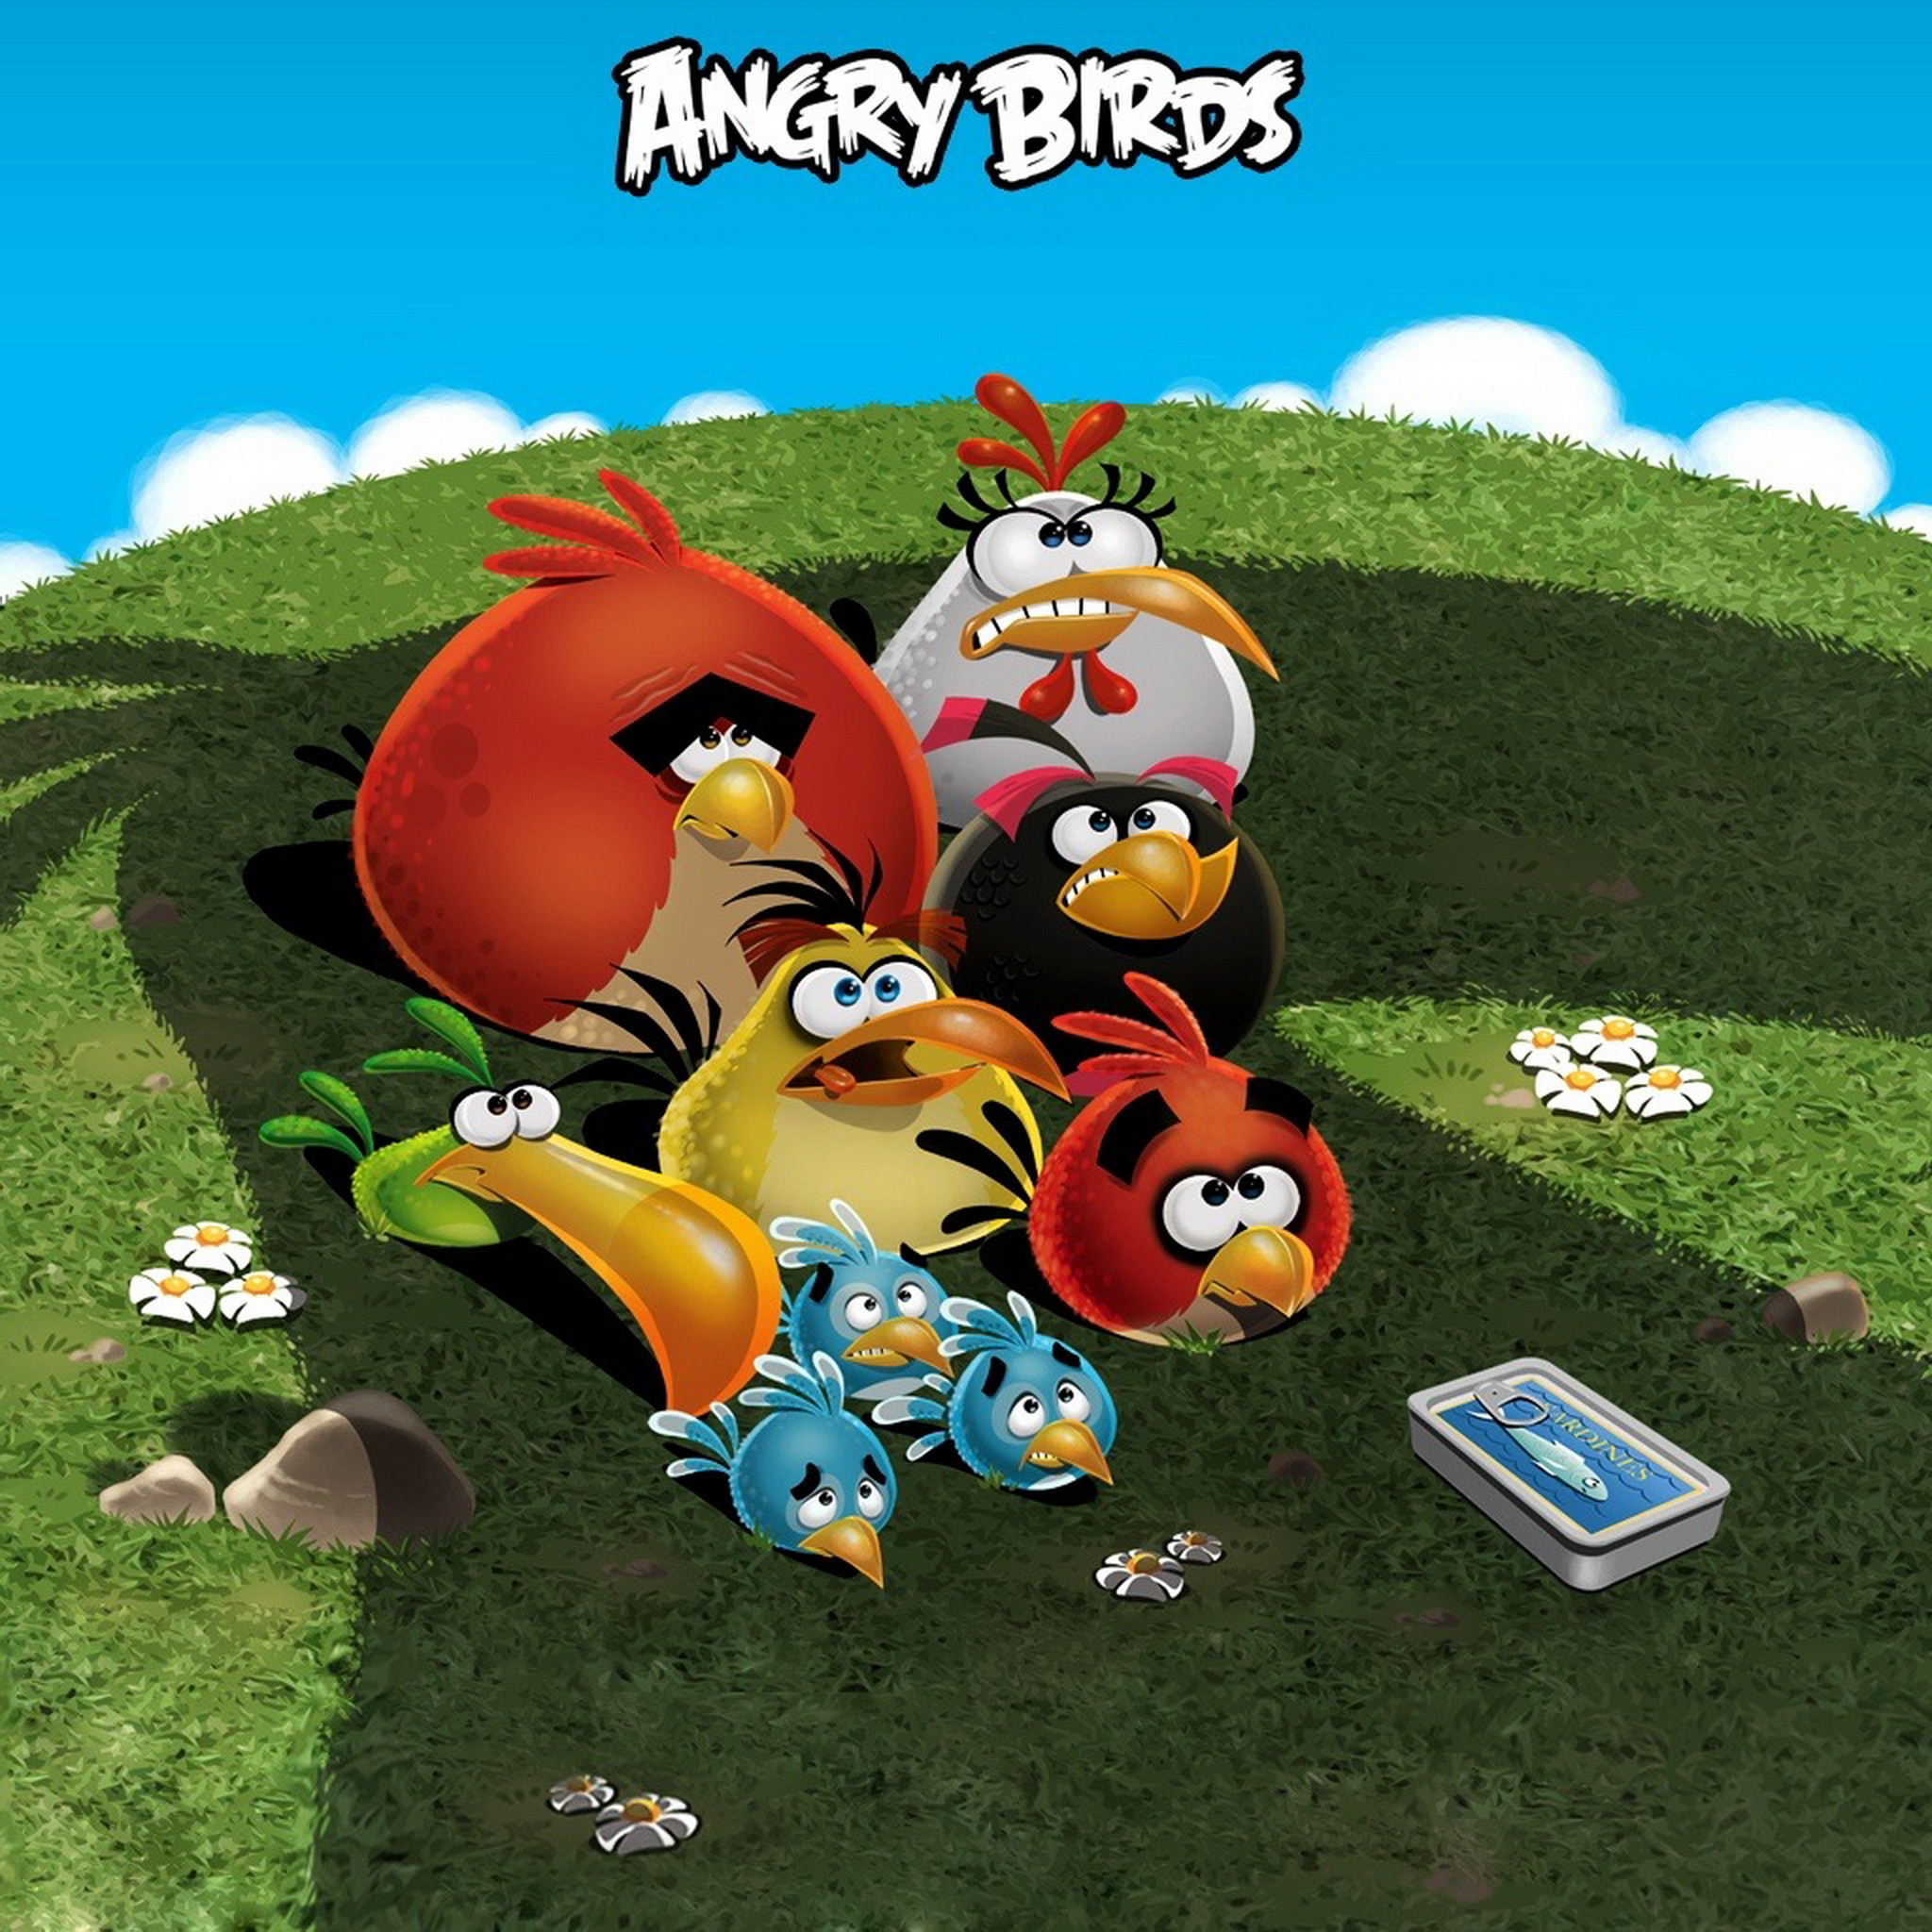 Angry Birds Ipad Wallpaper Ipad 3 Background Wallpapers